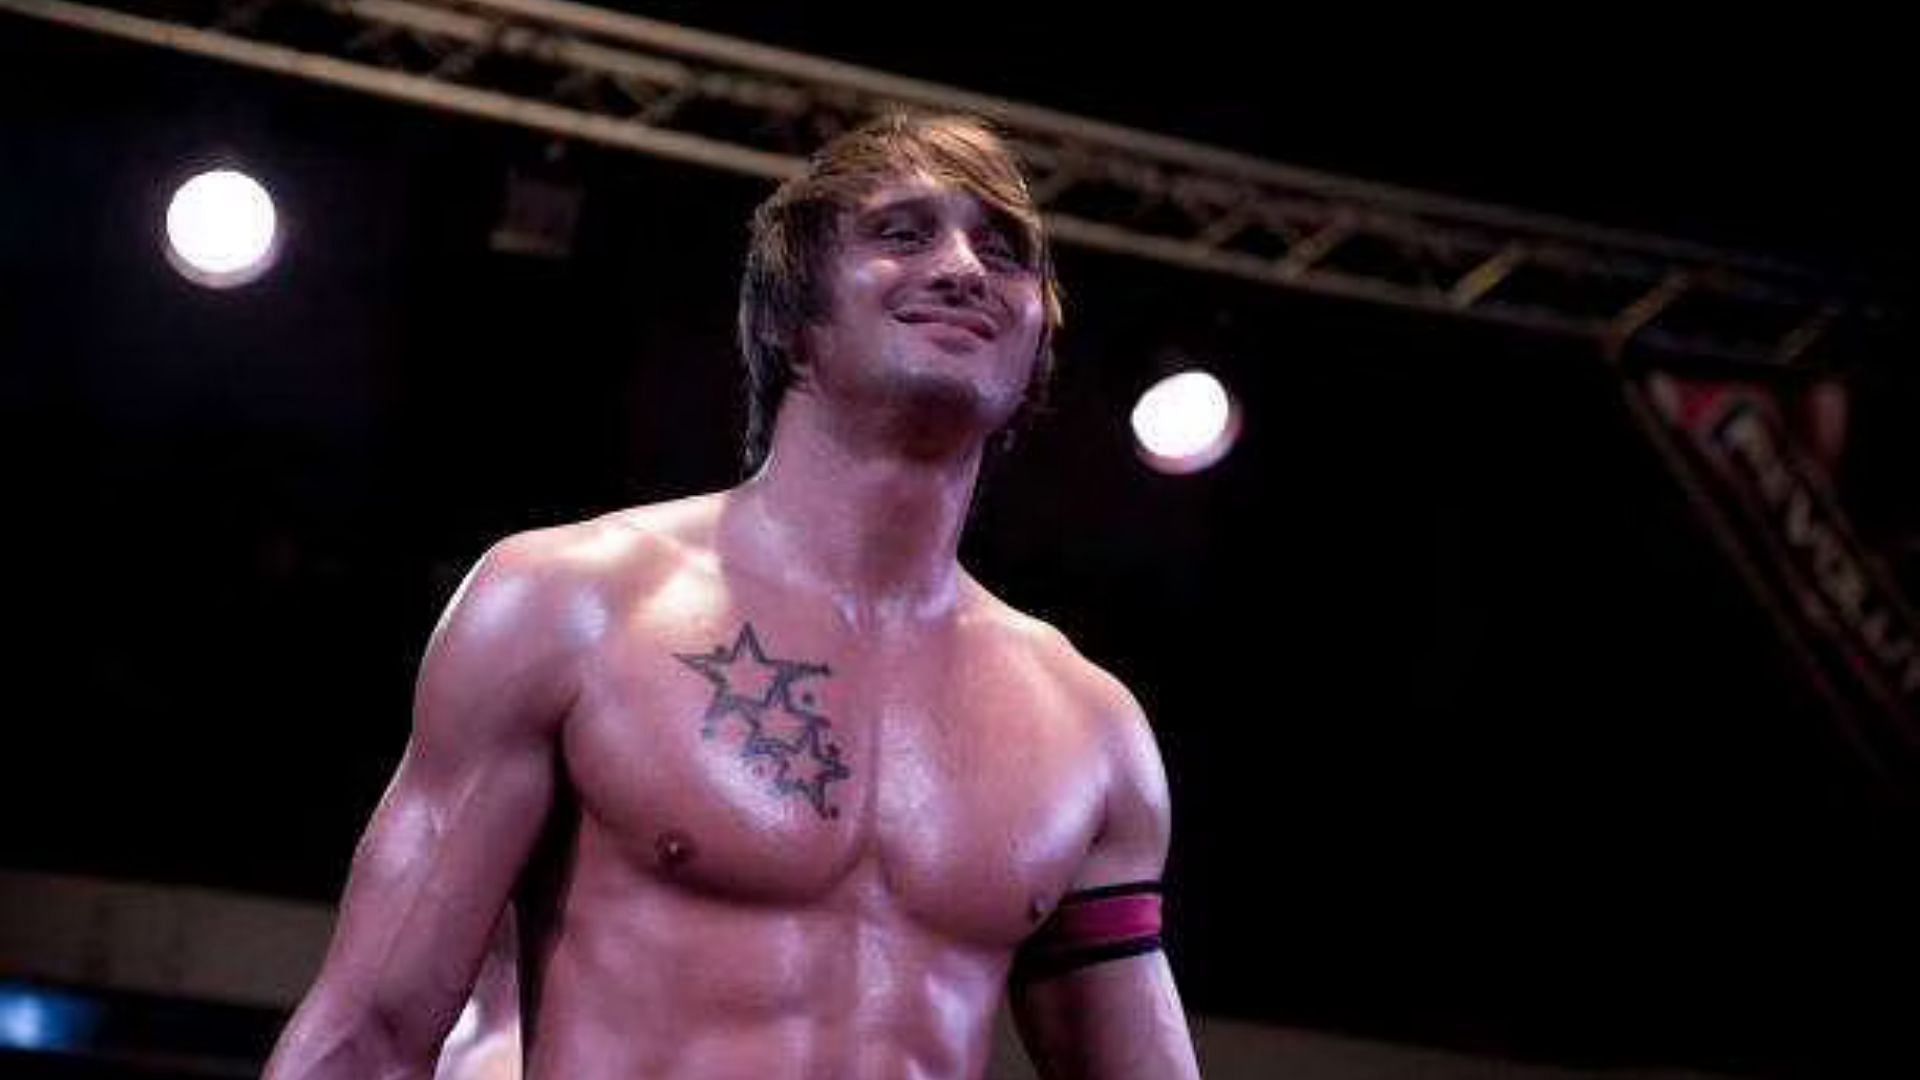 Kris Travis passed away at the age of 32